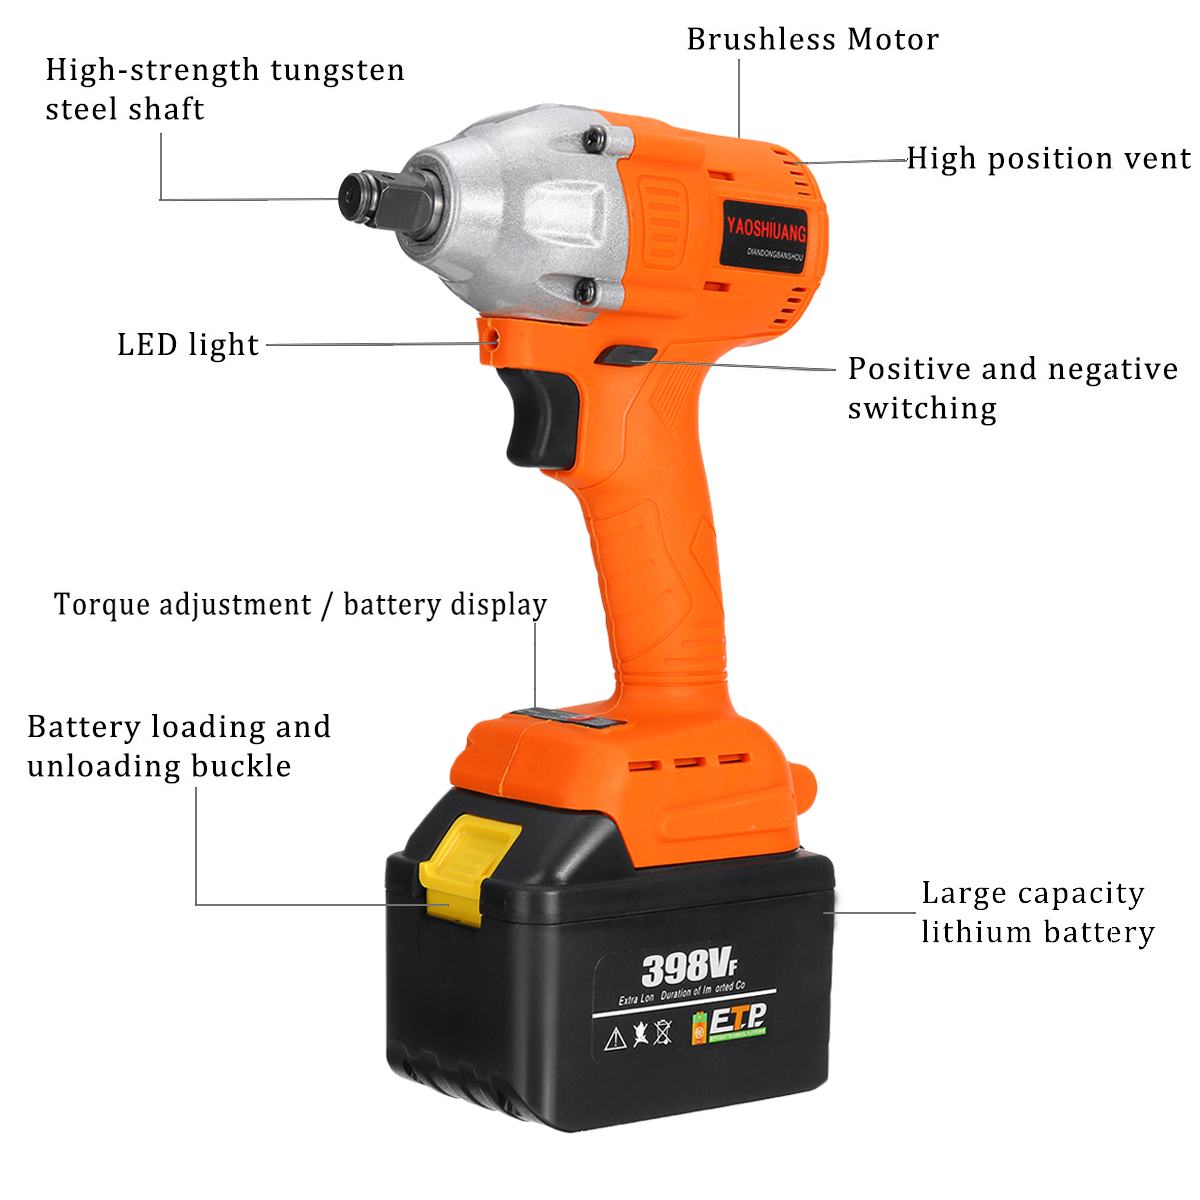 398VF 39800mah Electric Impact Brushless Wrench Electric Wrench 2 Battery Rechargeable 1/2'' Cordless Hand Power Tool 110-240V